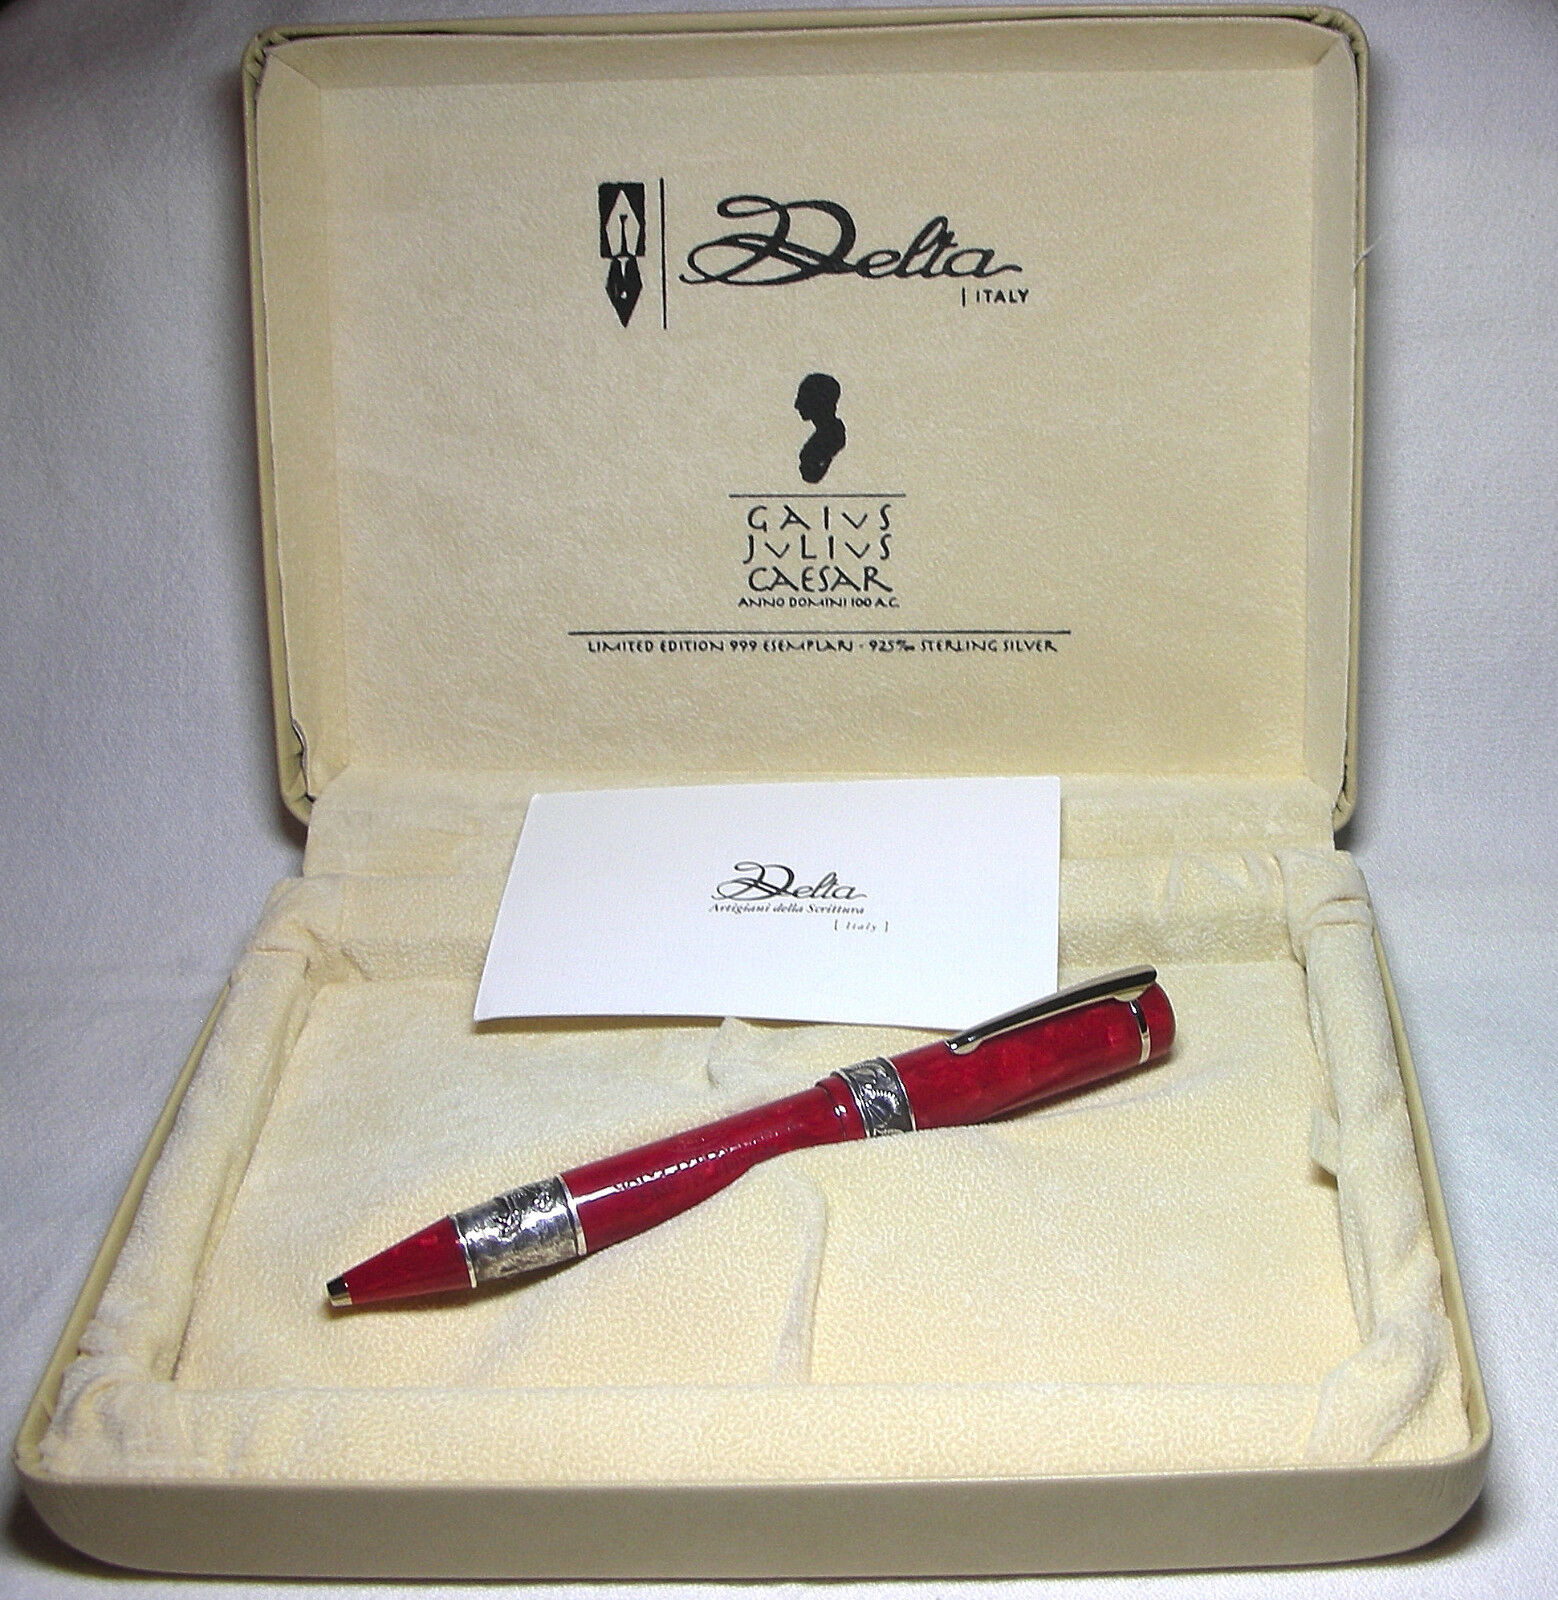 Delta Julius Caesar 1999 Limited Edition Pen in Red New in Box Product 